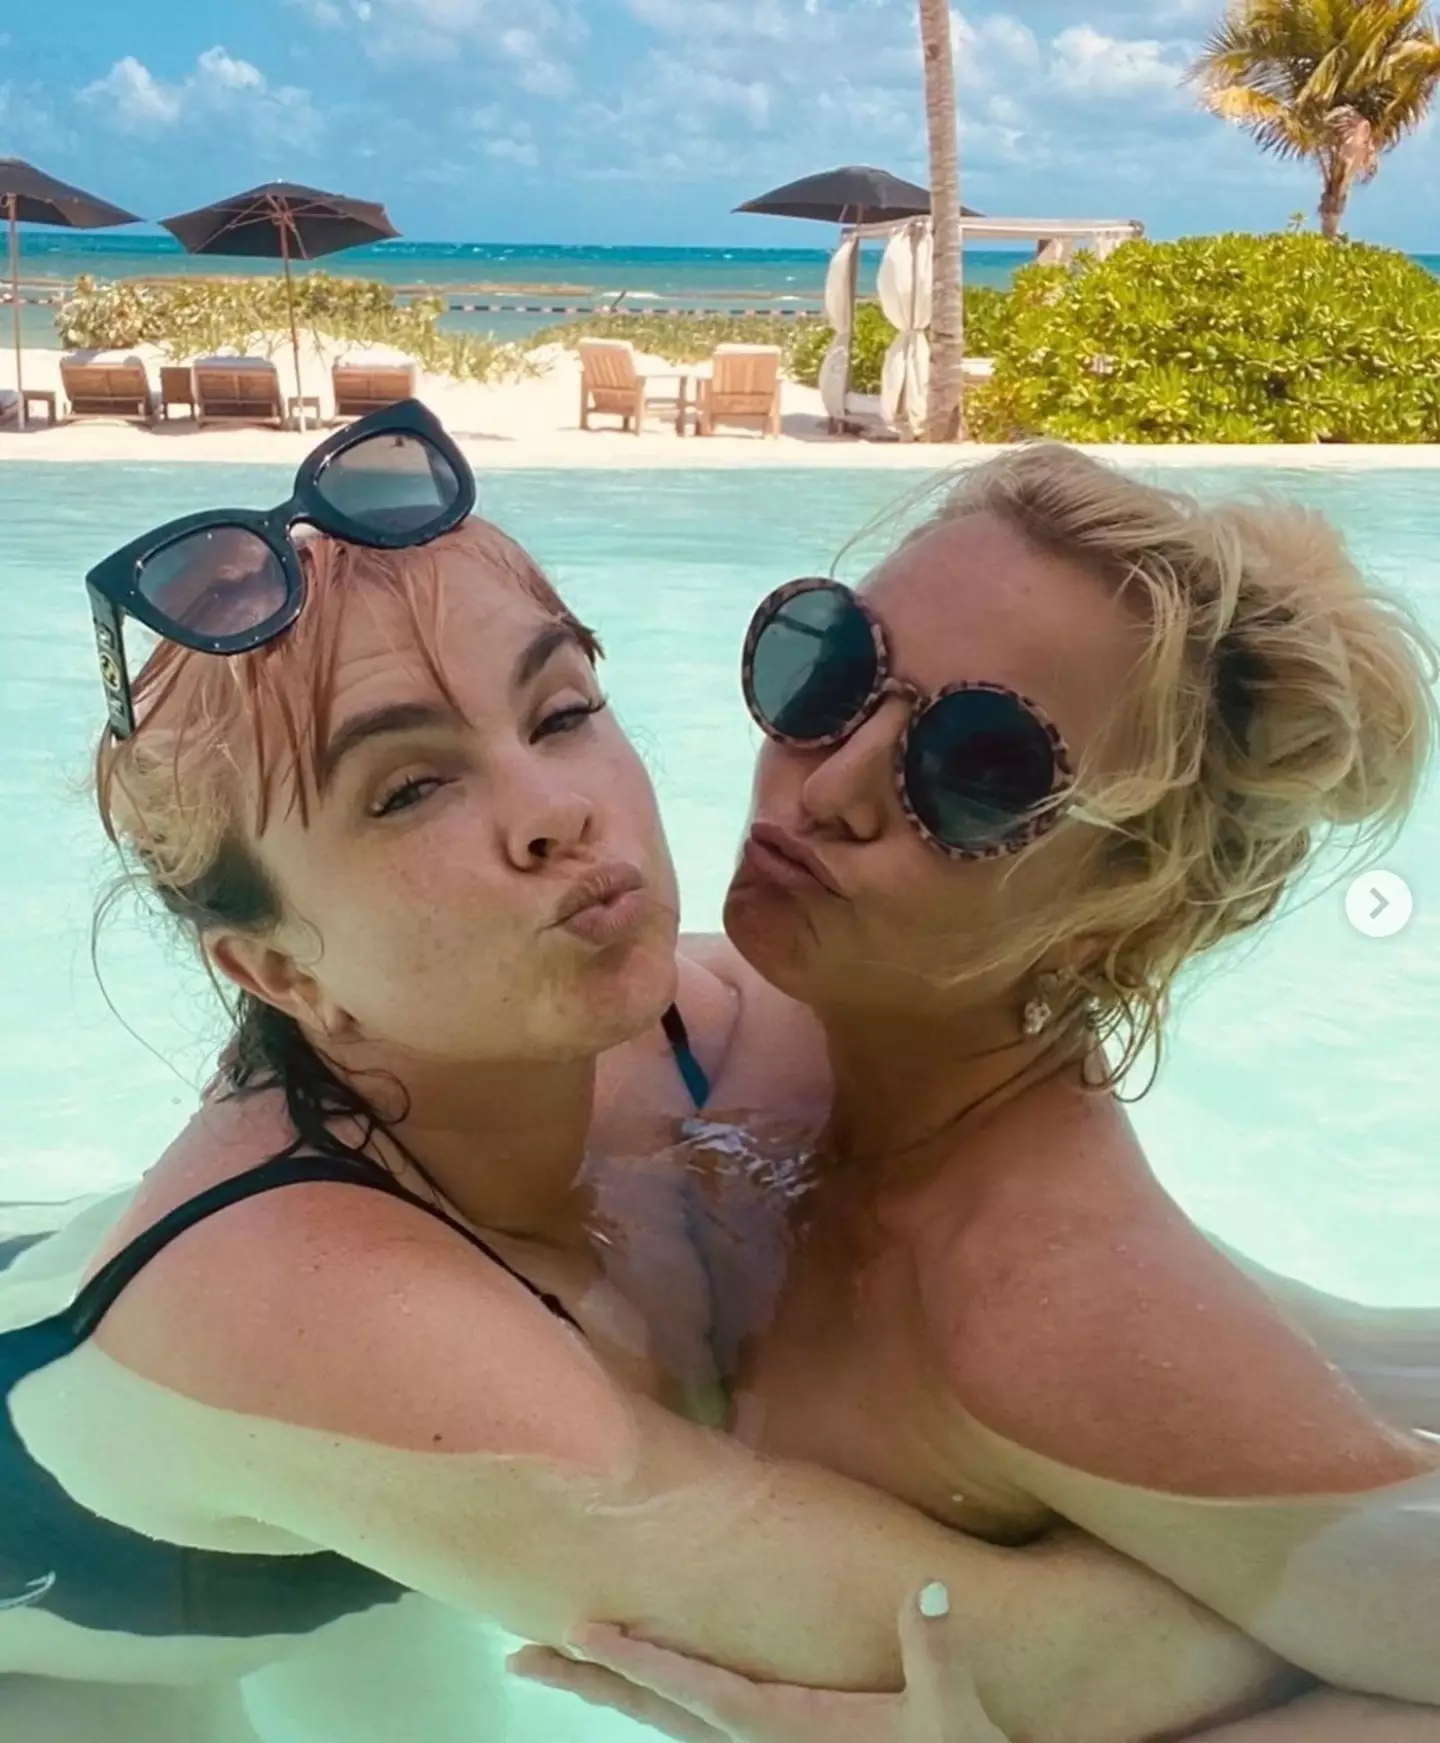 Previously, the pop icon told fans that she just returned from a holiday with Sam when she thought she might be pregnant (Instagram Britney Spears).